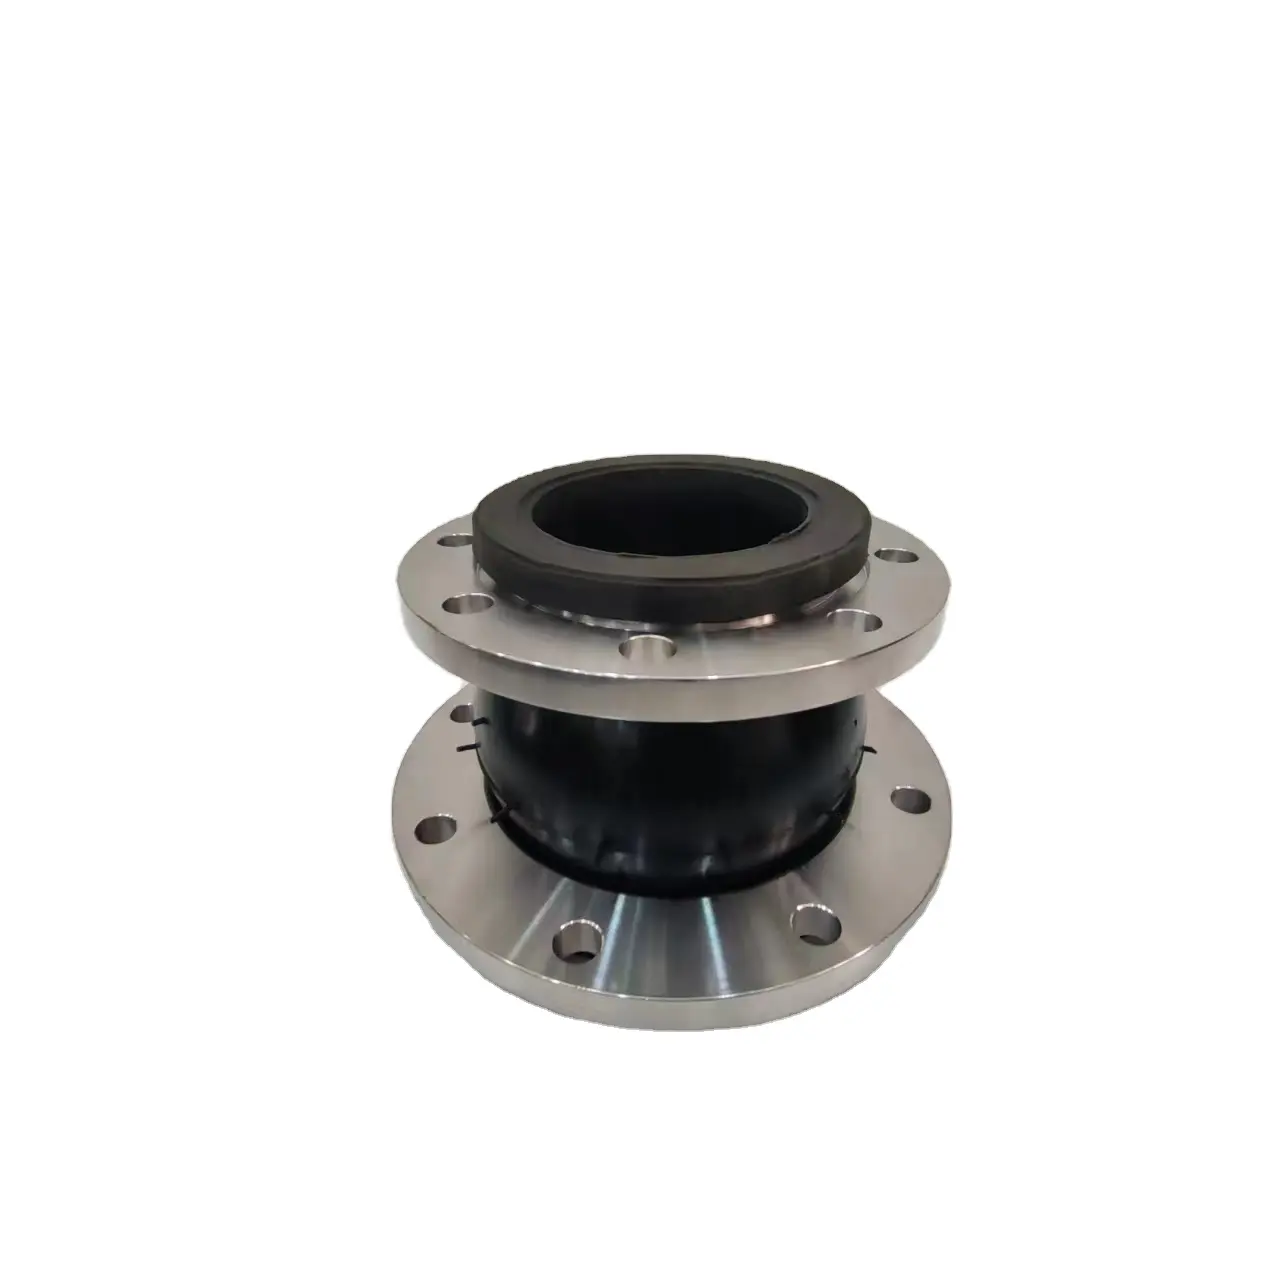 OEM Supported Tool Parts Reducing Rubber Soft Connection for Easy Pipe Size Change